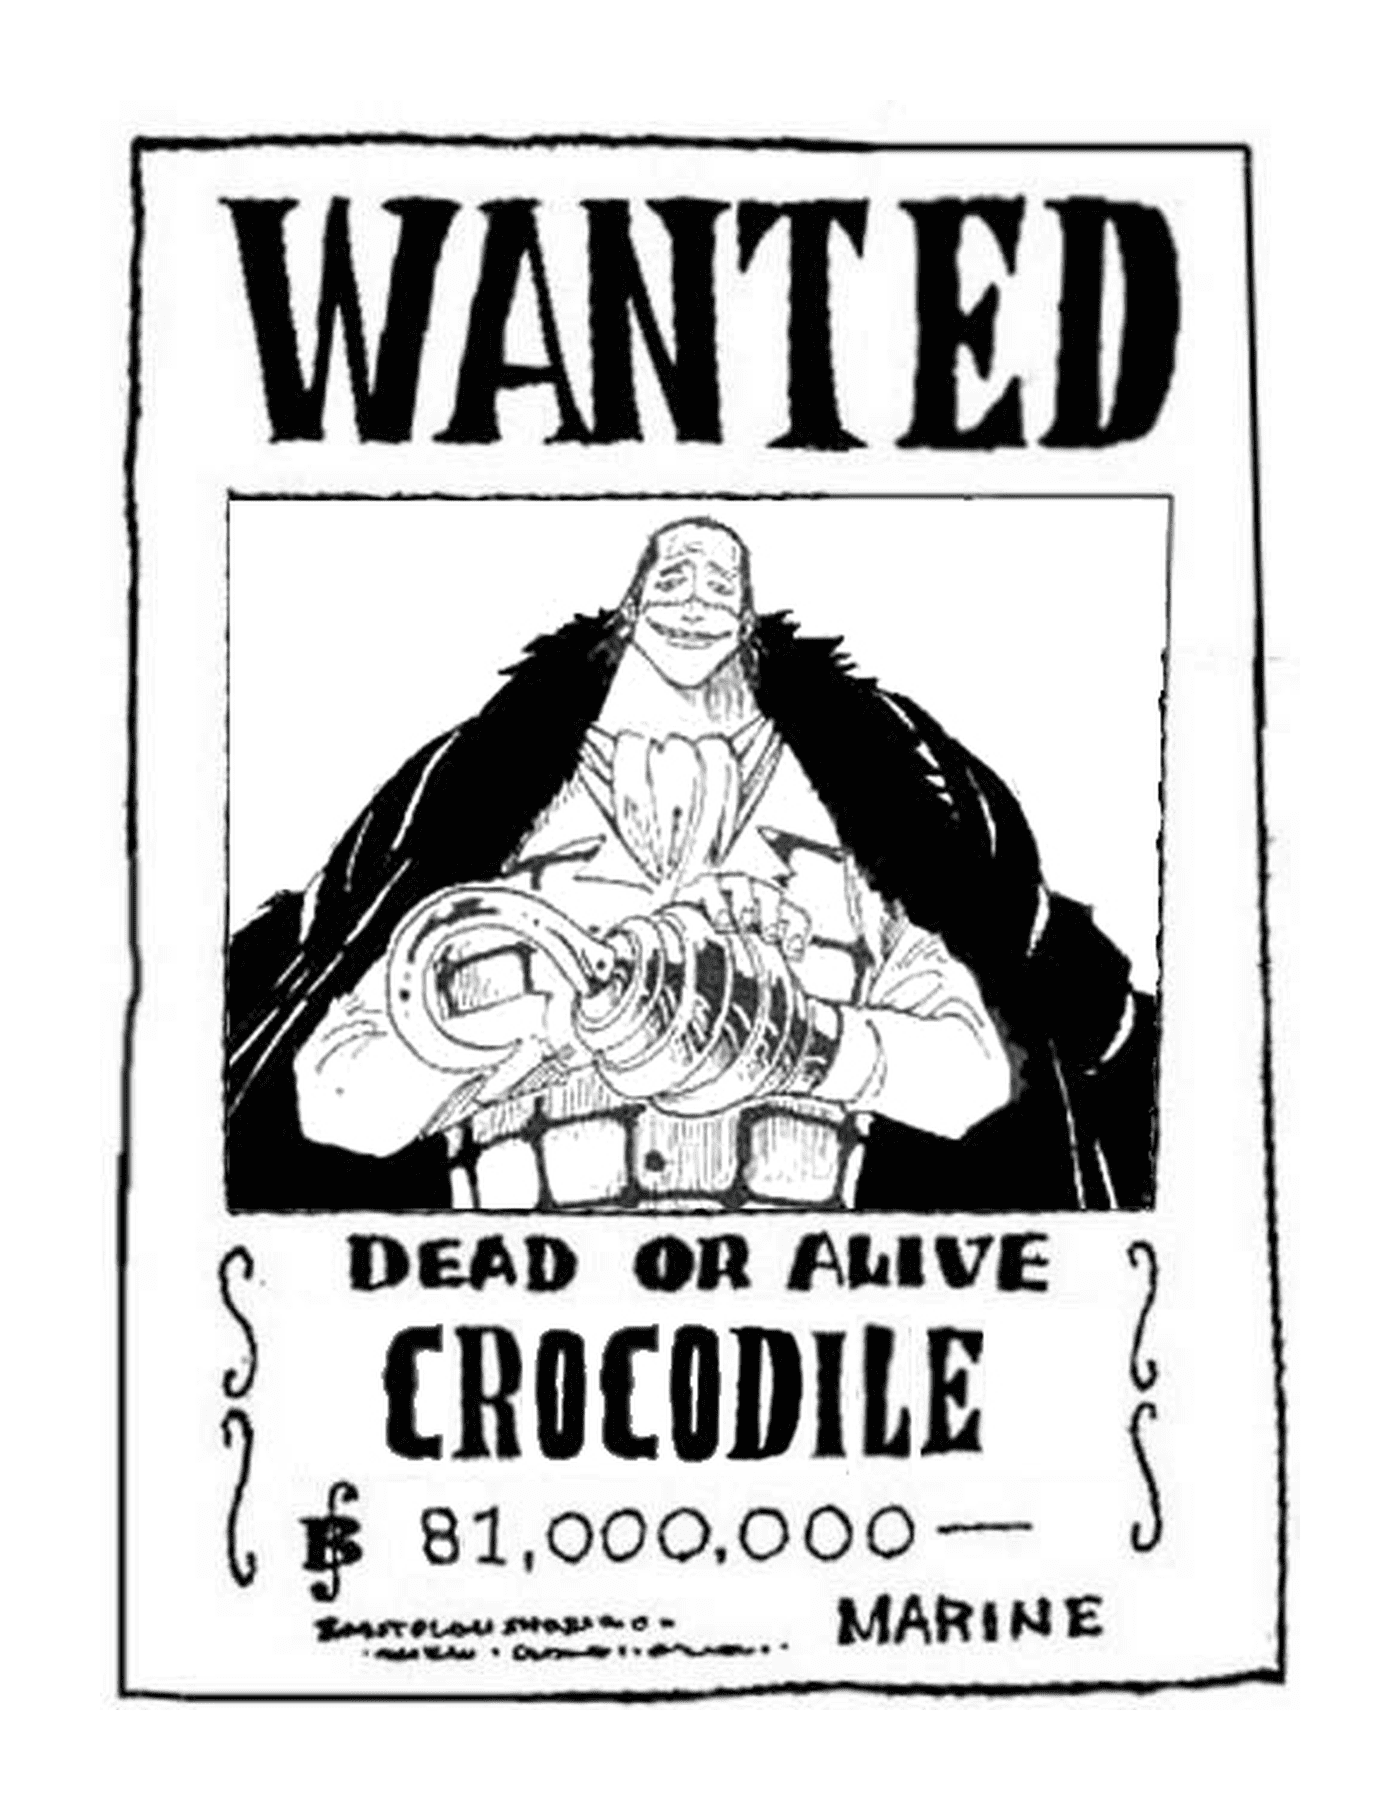  Wanted Crocodile, dead or alive 